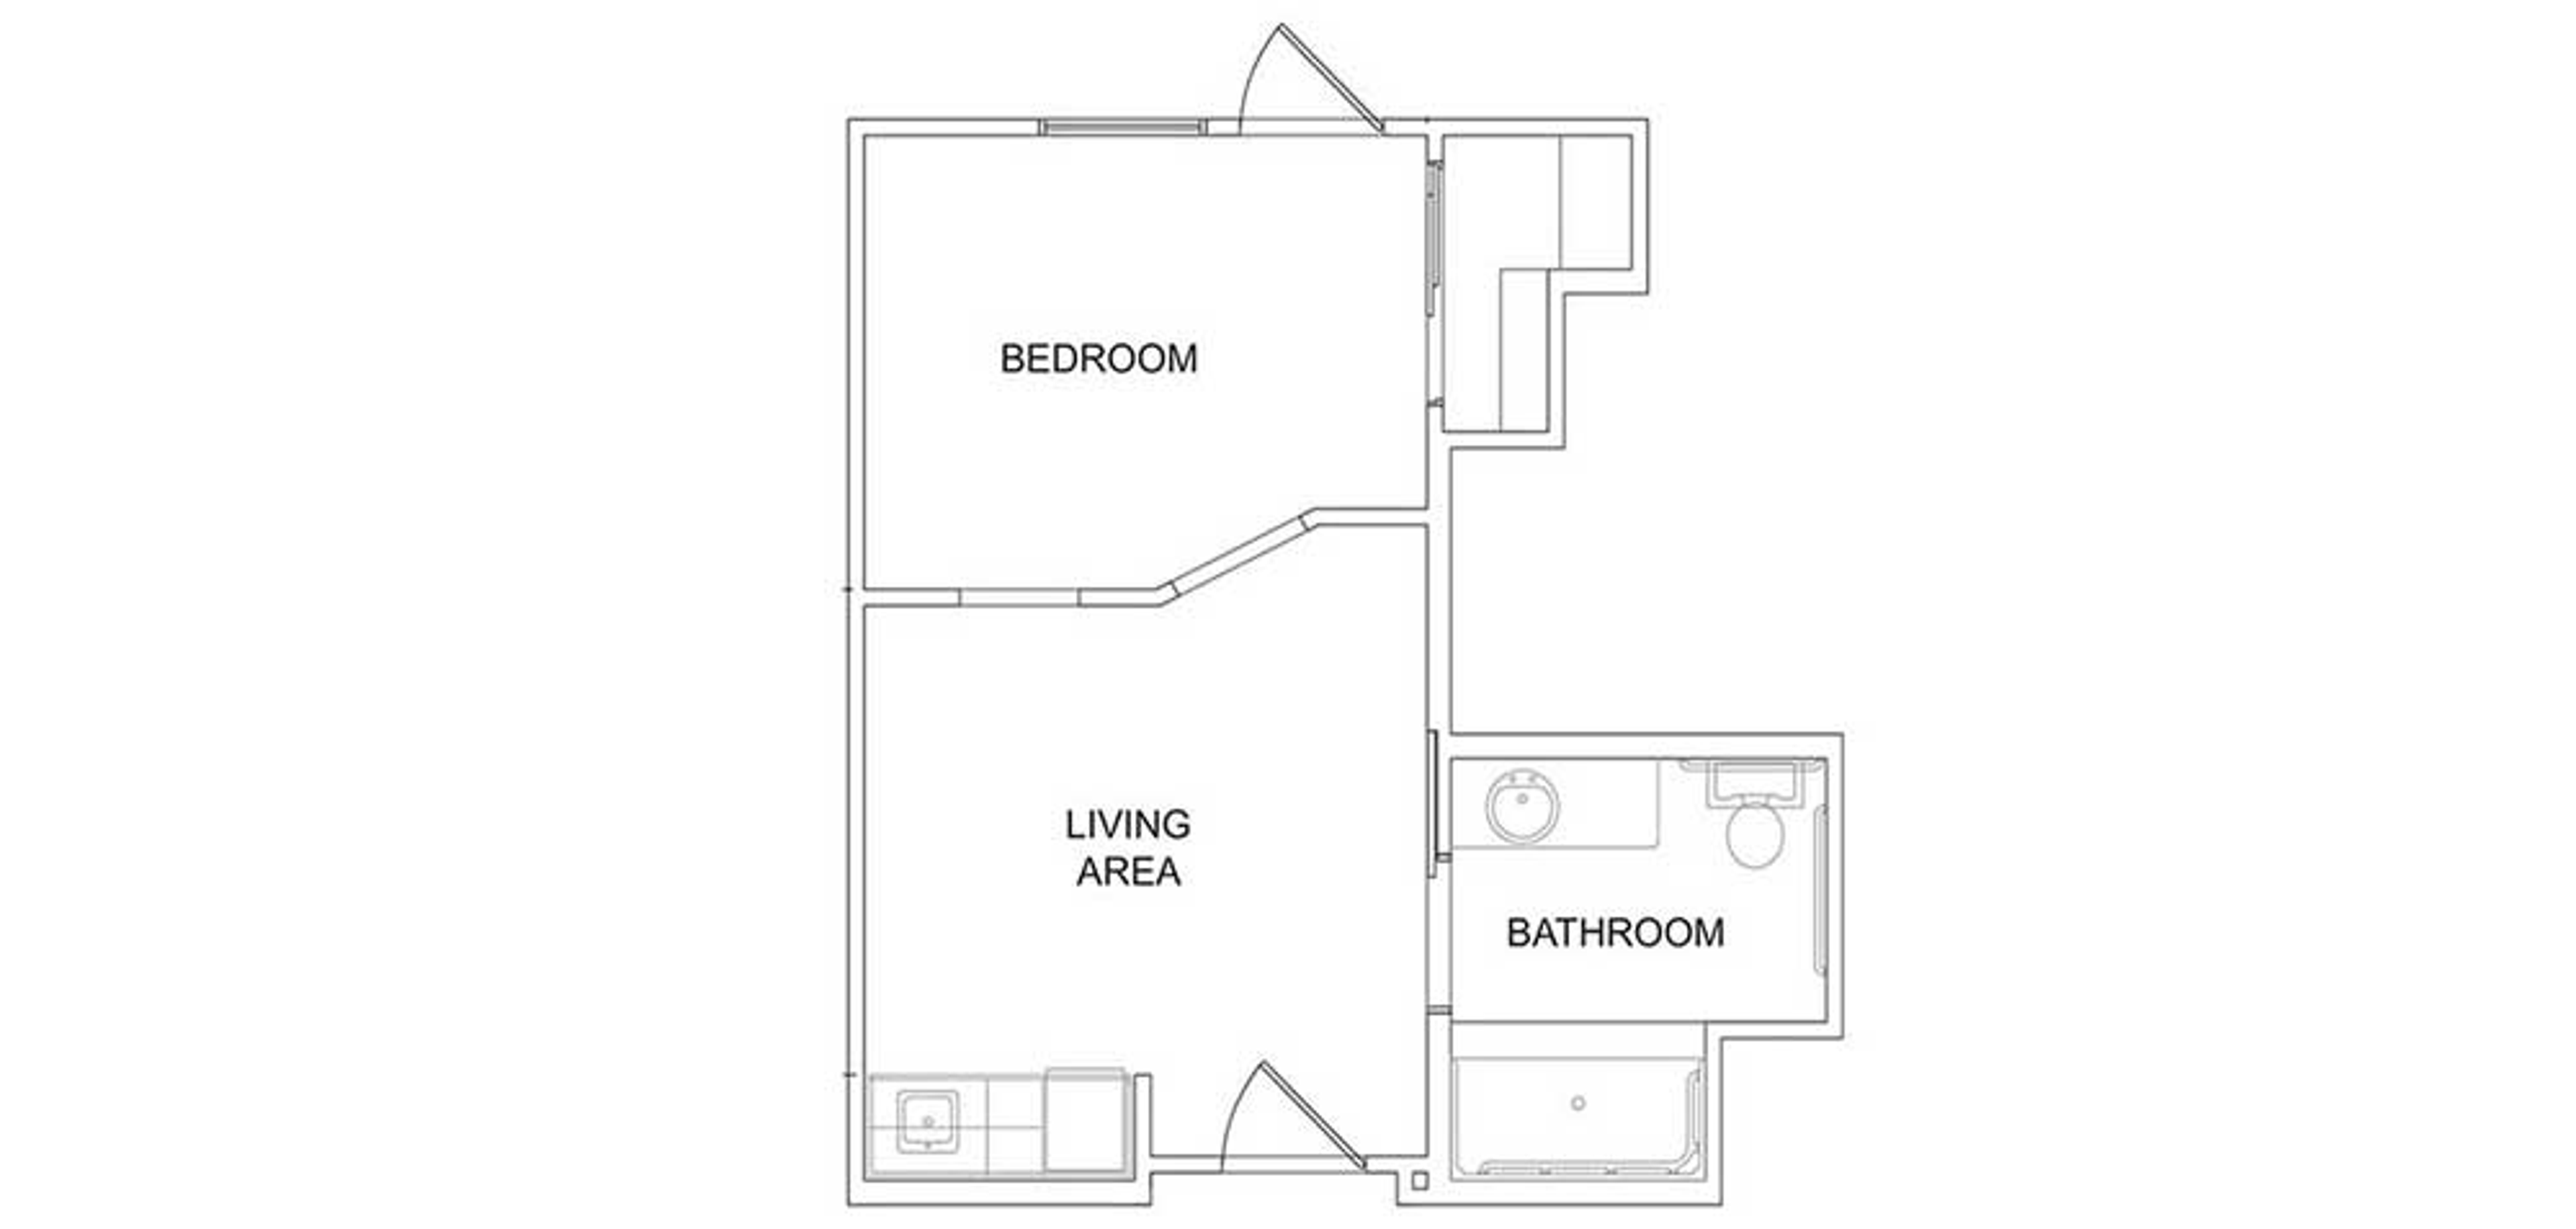 Floorplan - Stonefield - 1 bed, 1 bath, Courtyard Assisted Living